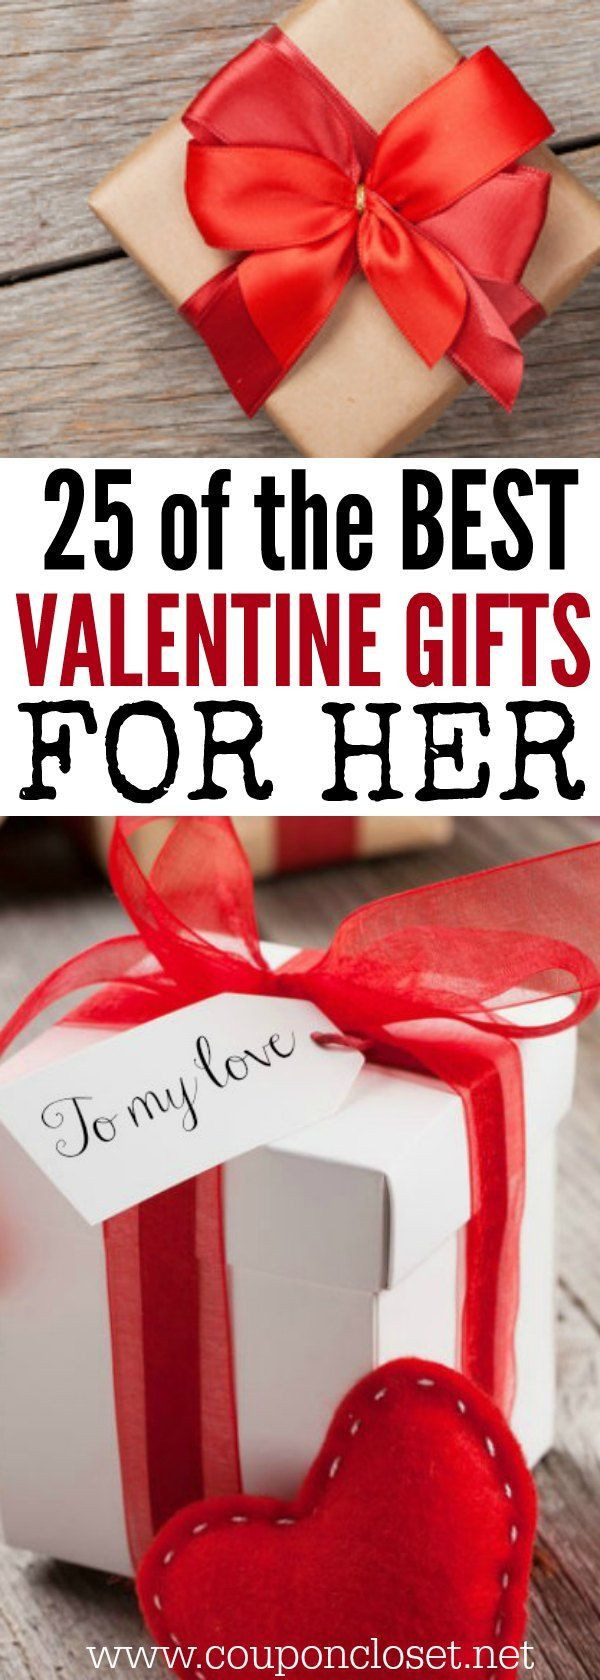 Great Valentines Gift Ideas For Her
 Over 25 Valentine s Day Gifts for Her a Bud  The